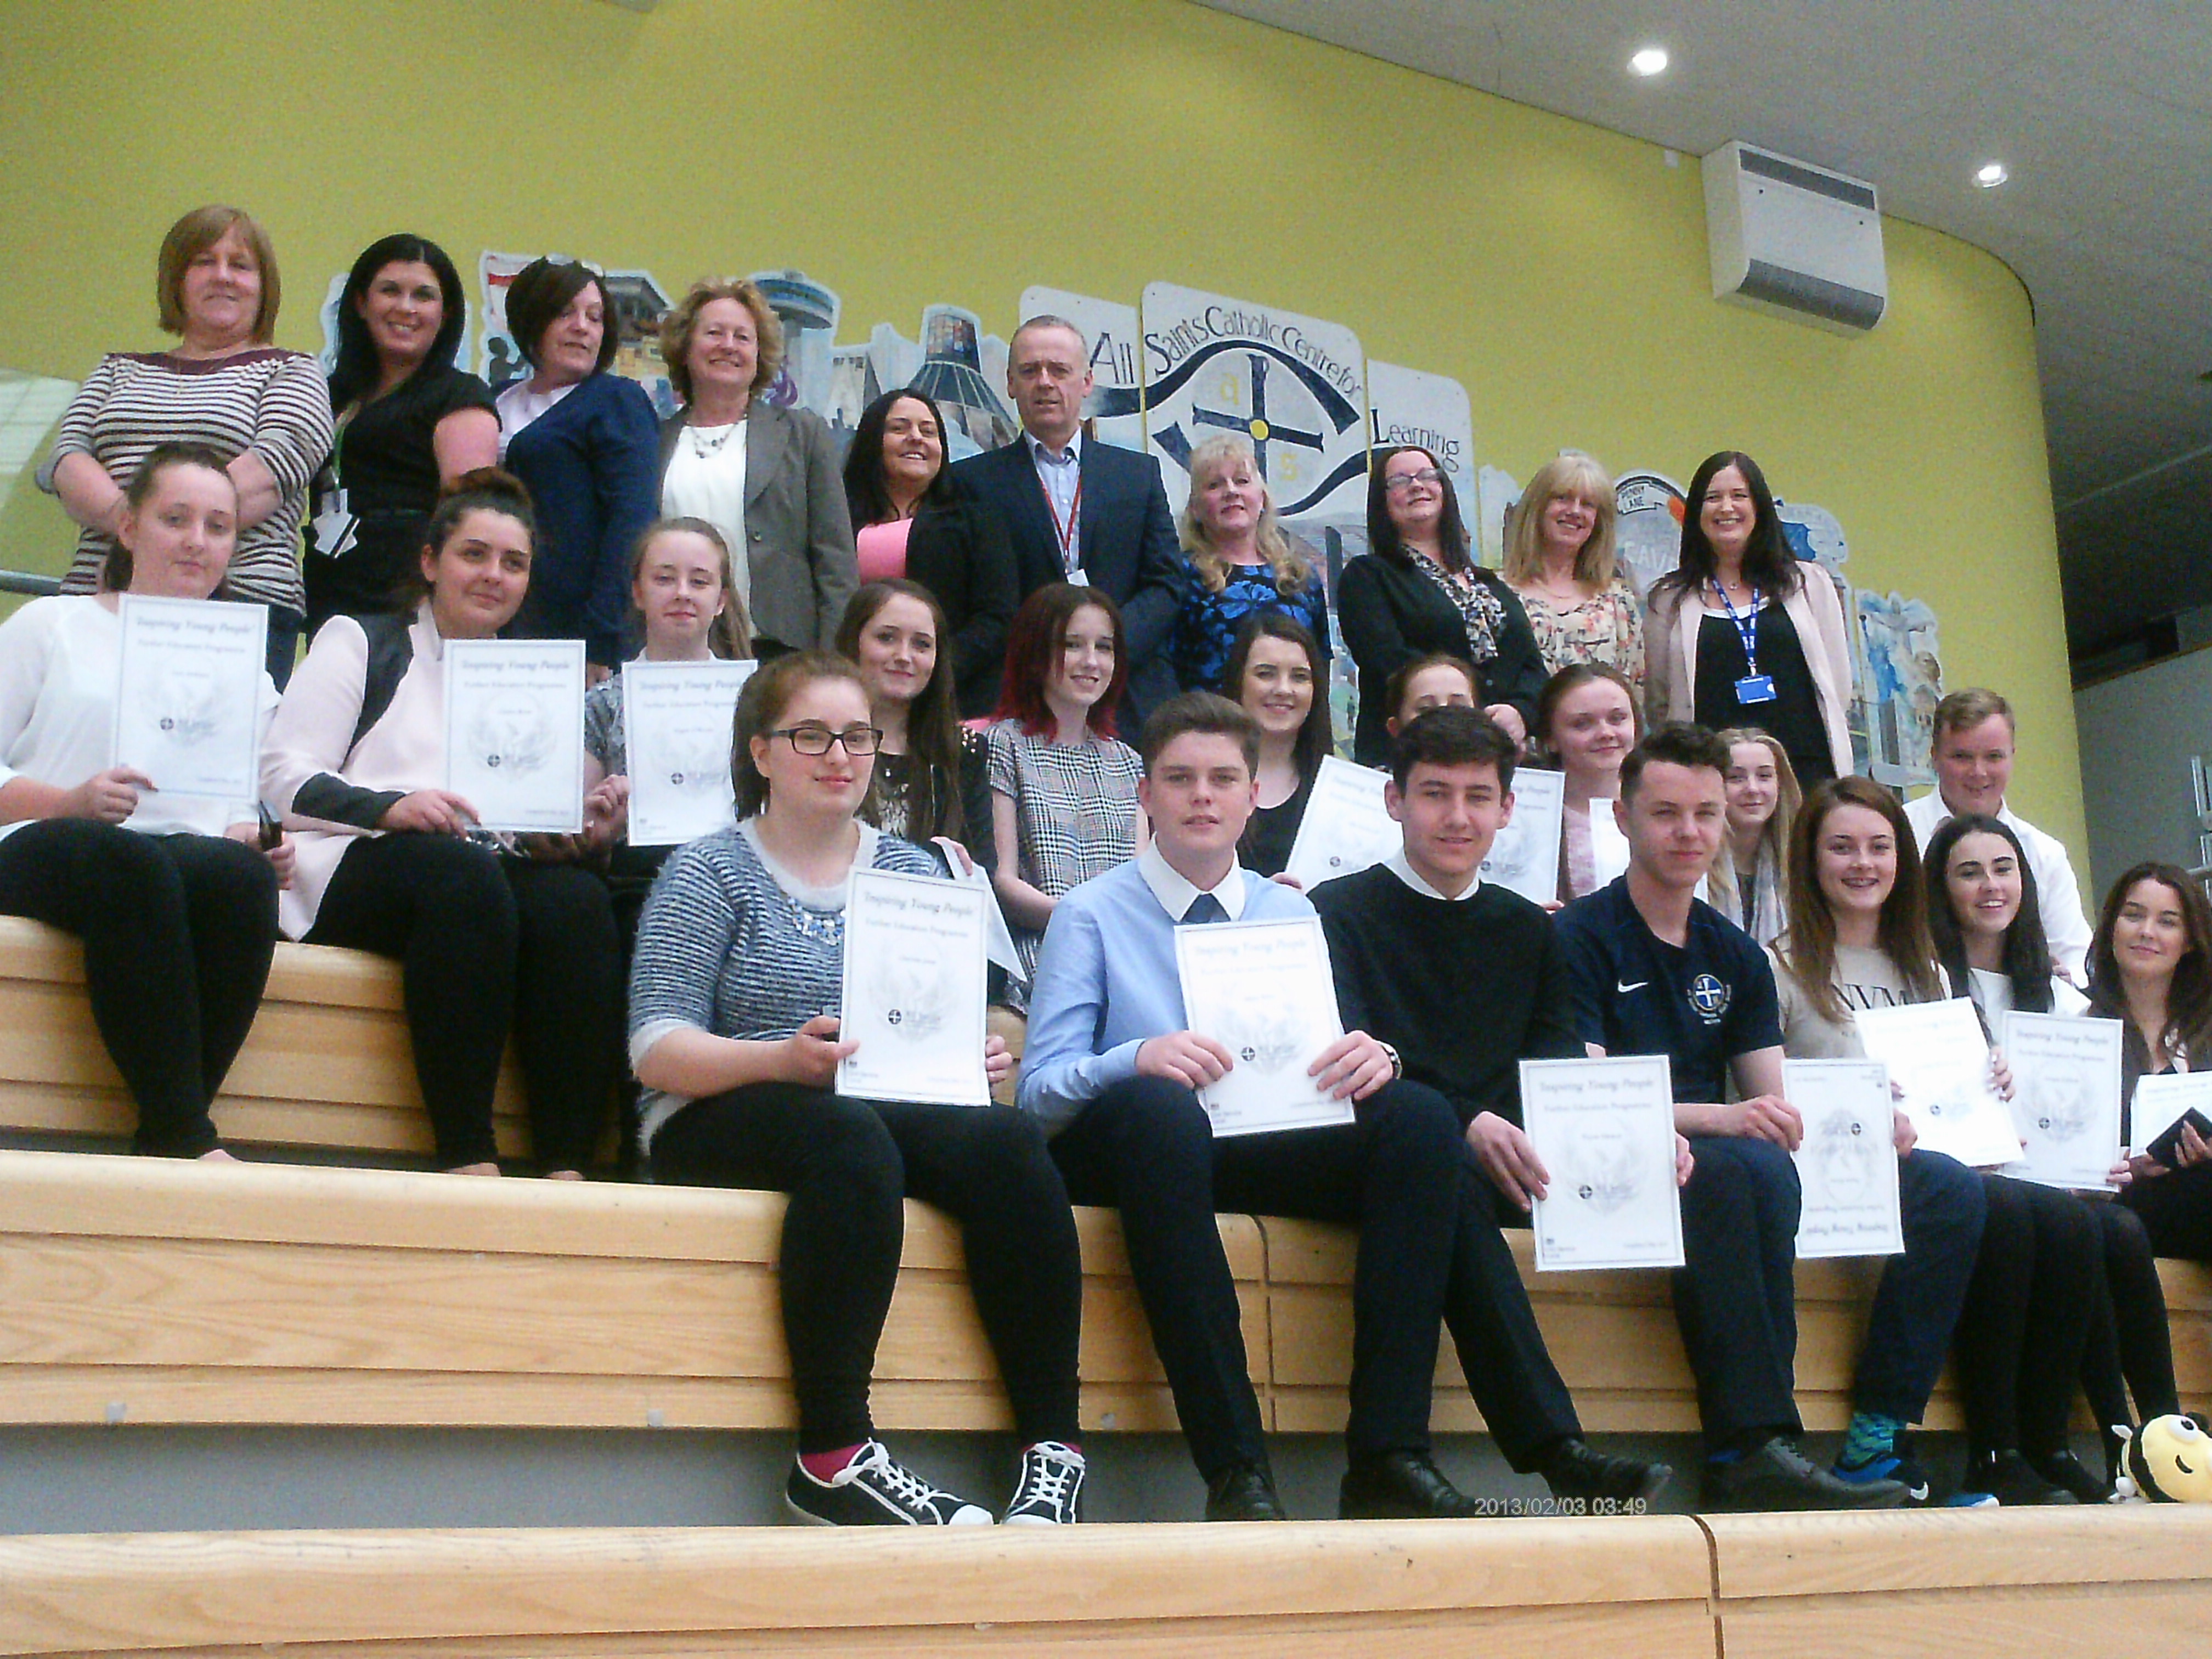 Students with certificates and mentors